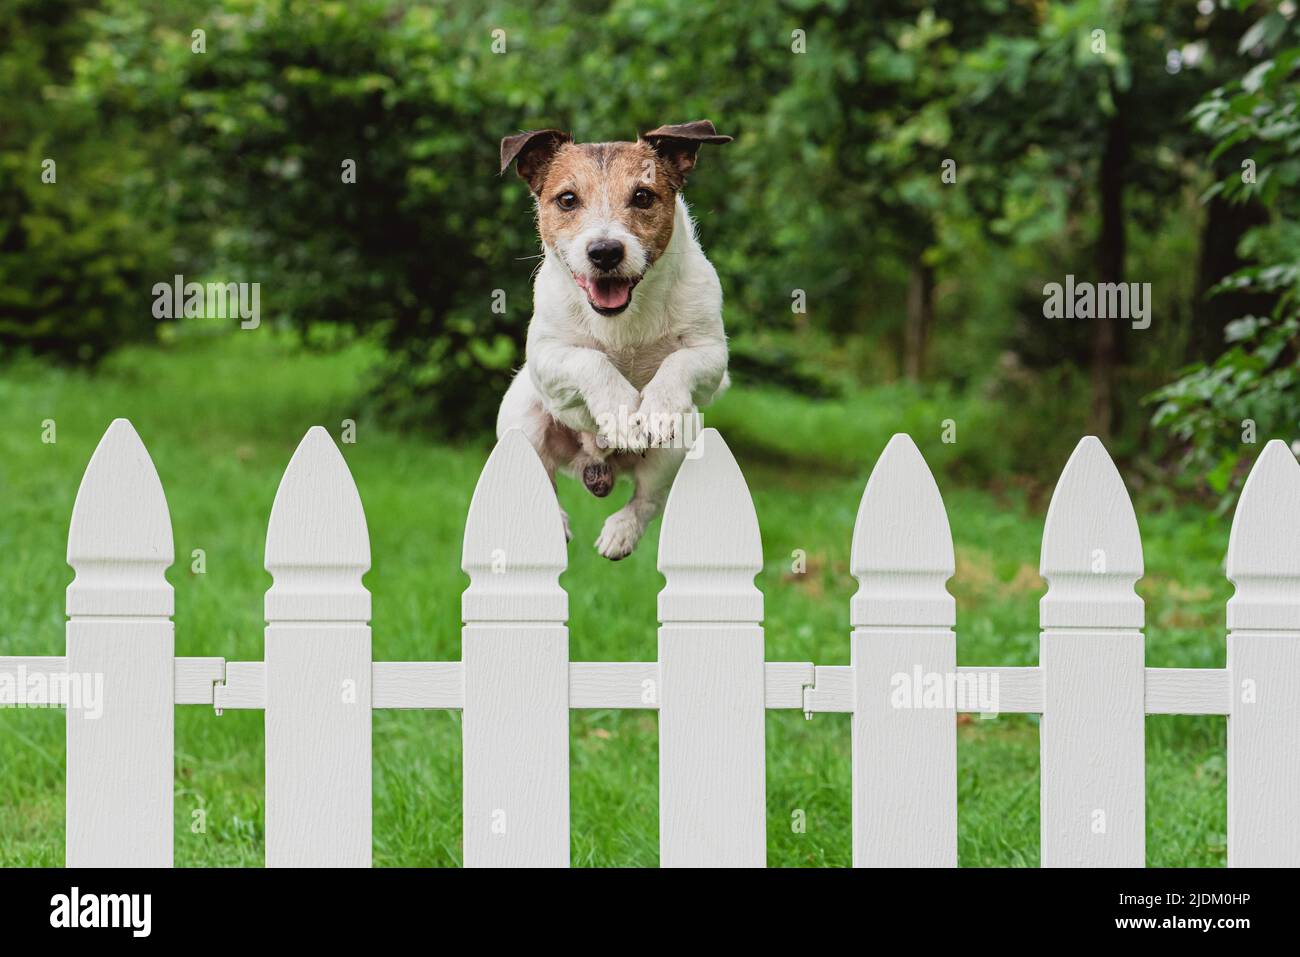 Cute happy dog jumping over fence of back yard to greet owner Stock Photo